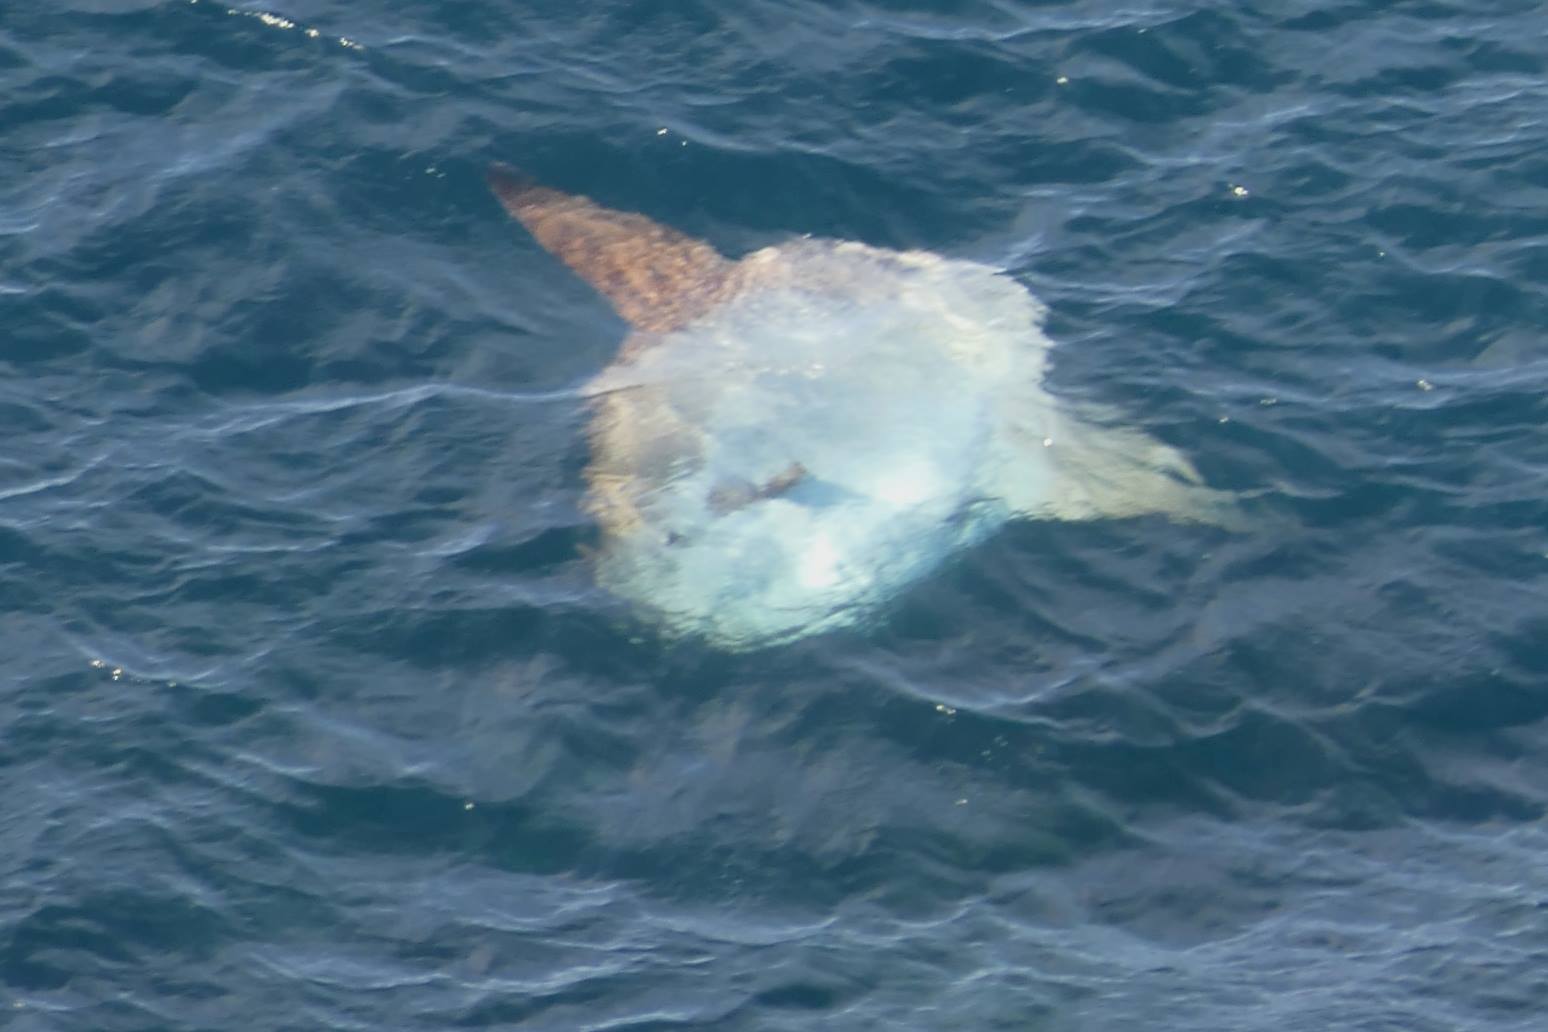 Sunfish approaches the surface in a horizontal position